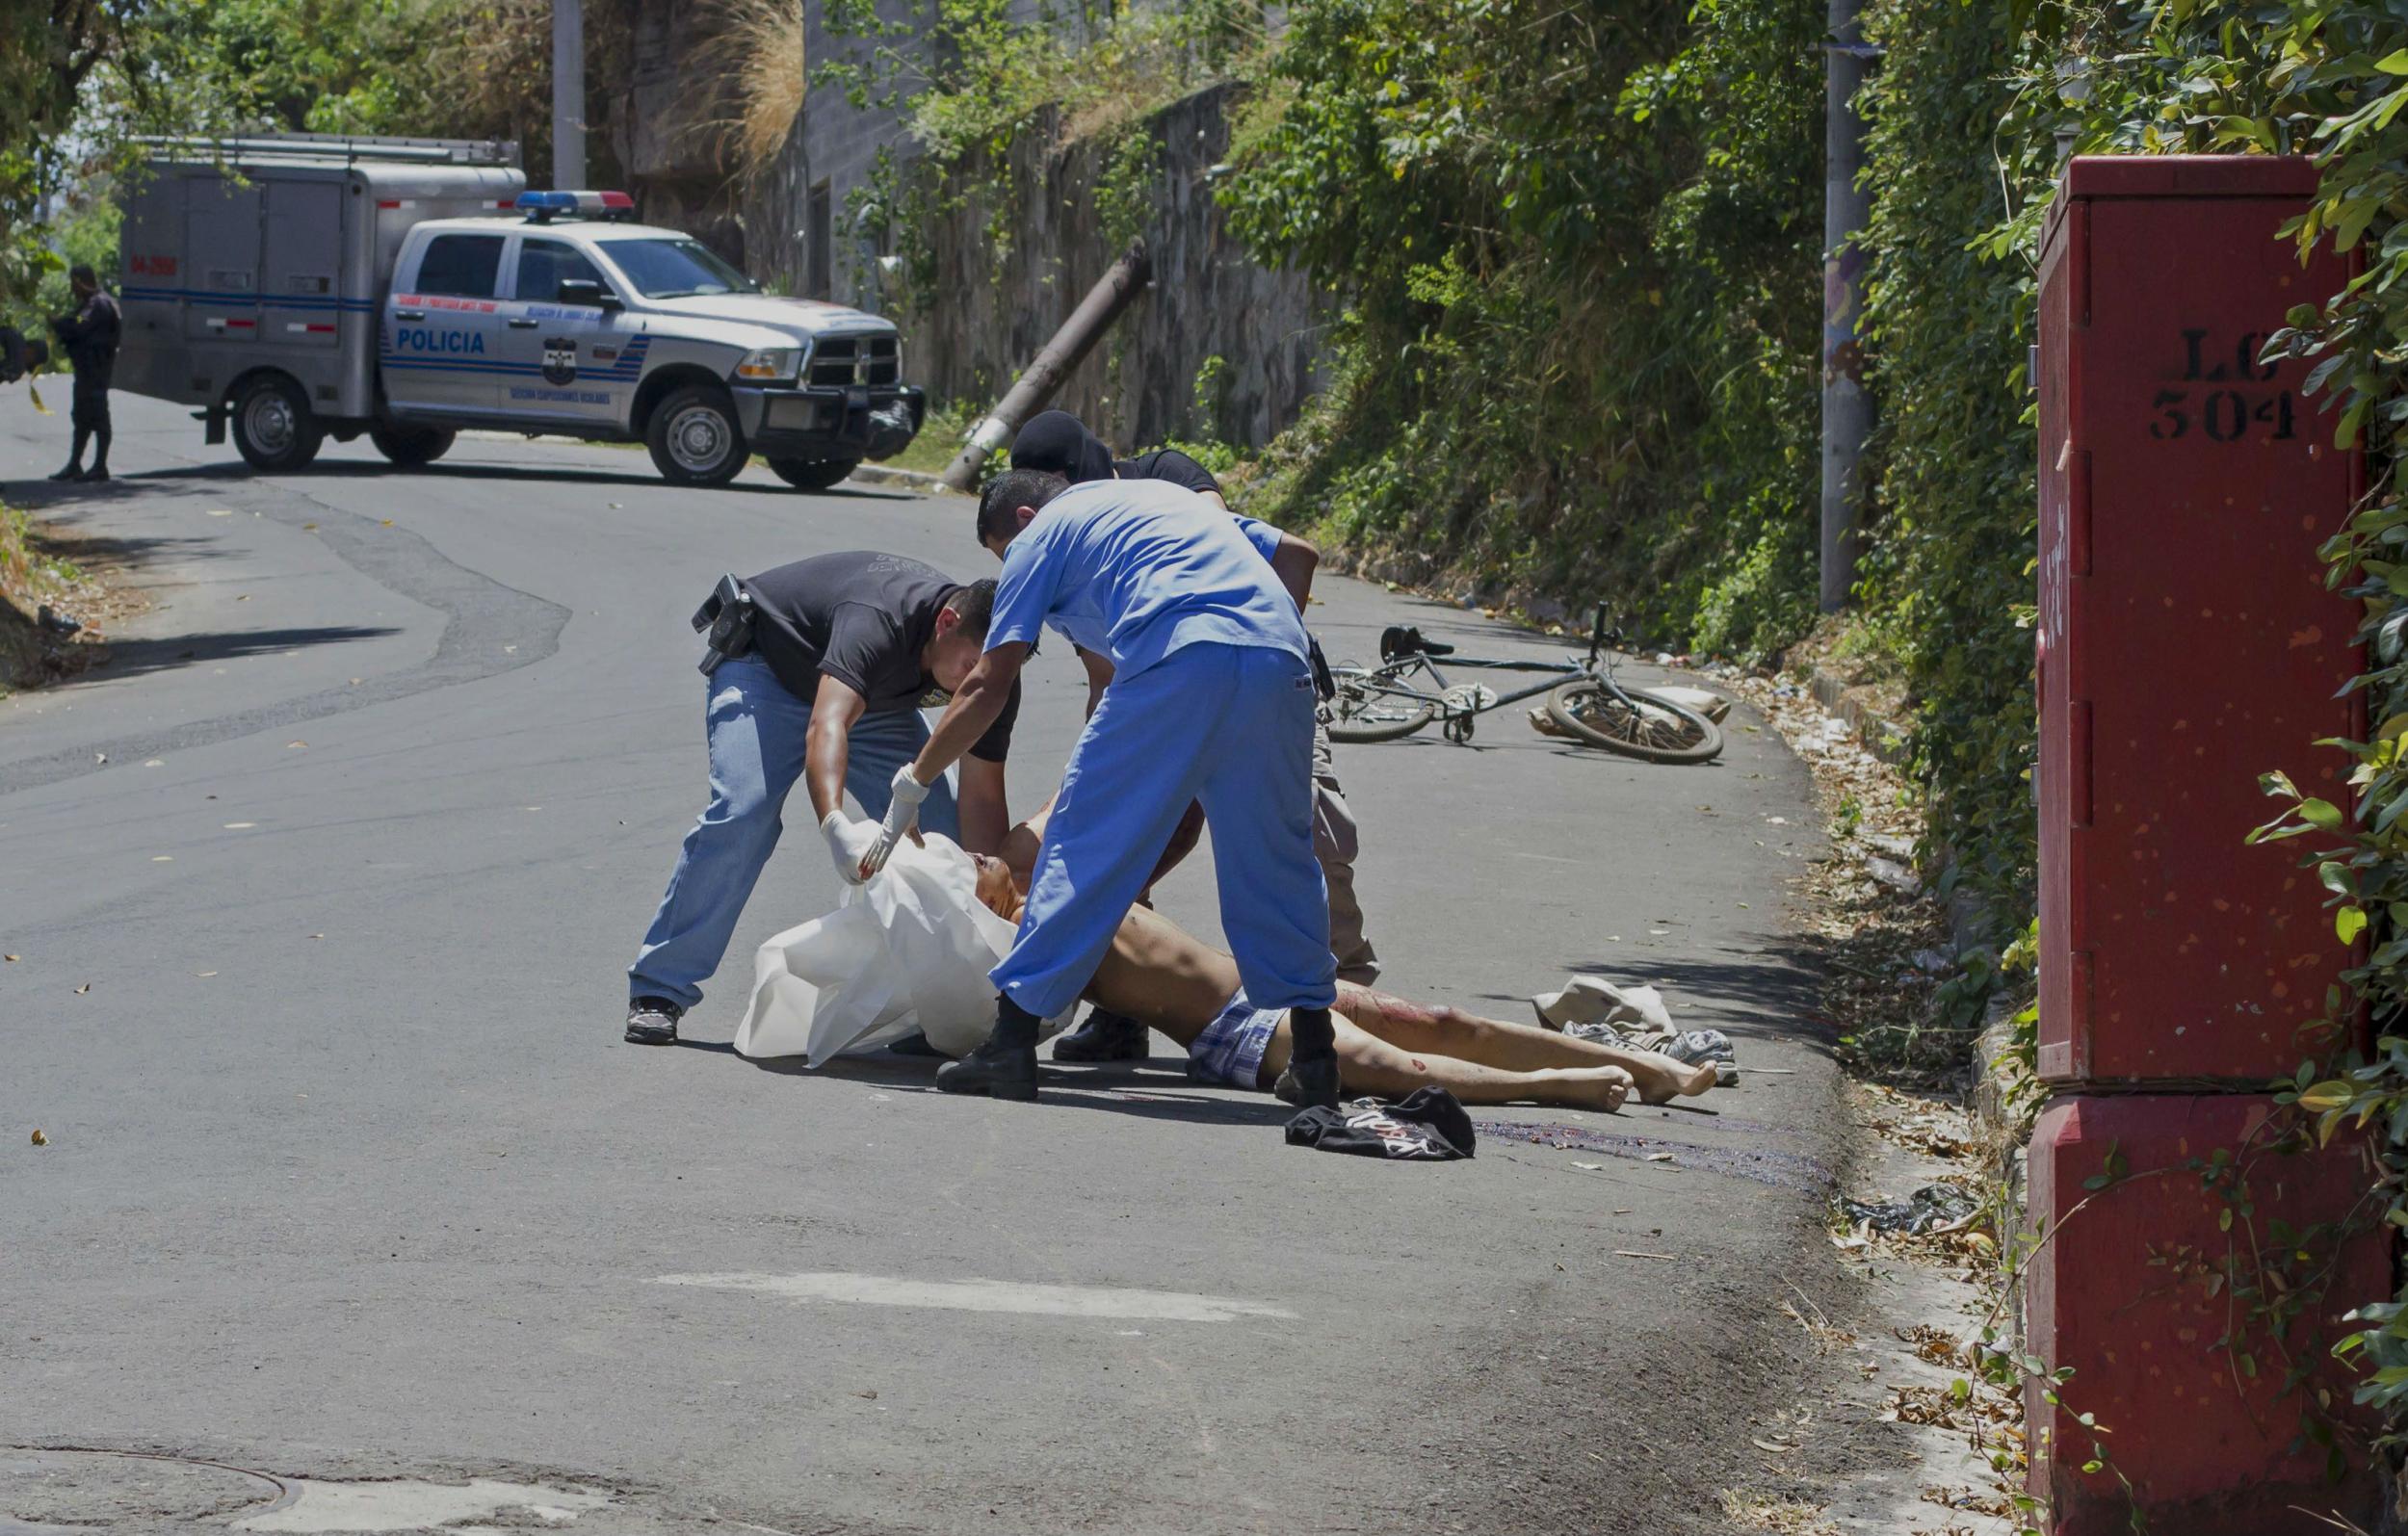 Teams work 24-7 to collect bodies that are dumped in the street